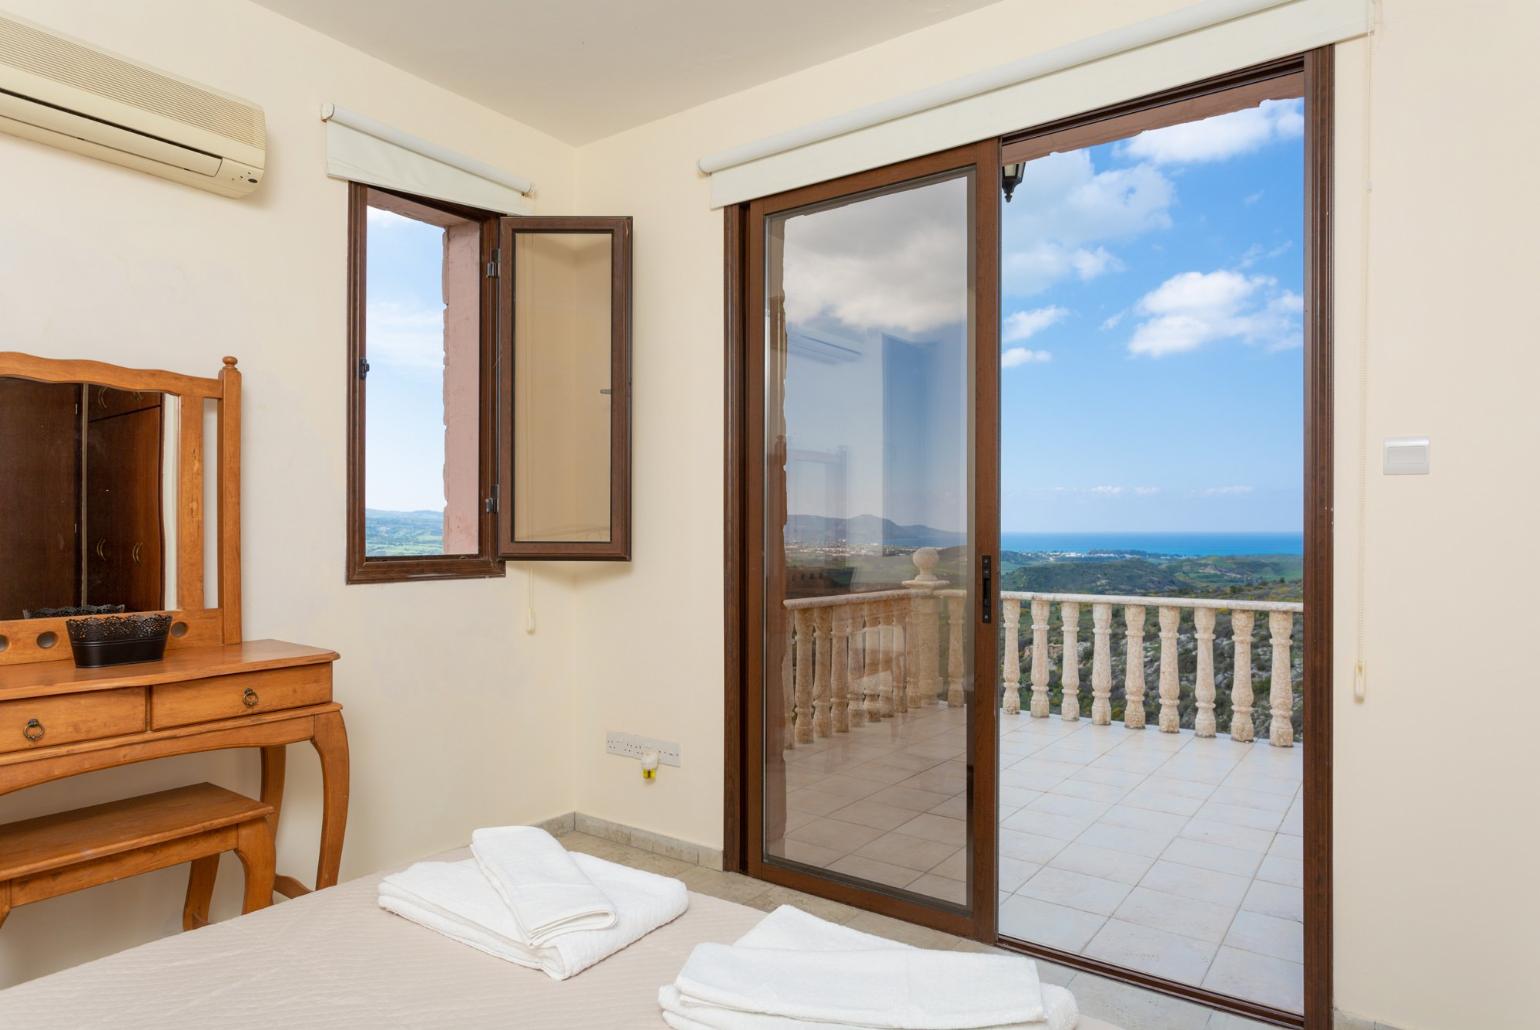 Double bedroom with en suite bathroom, A/C, and balcony access with panoramic views of the sea and countryside